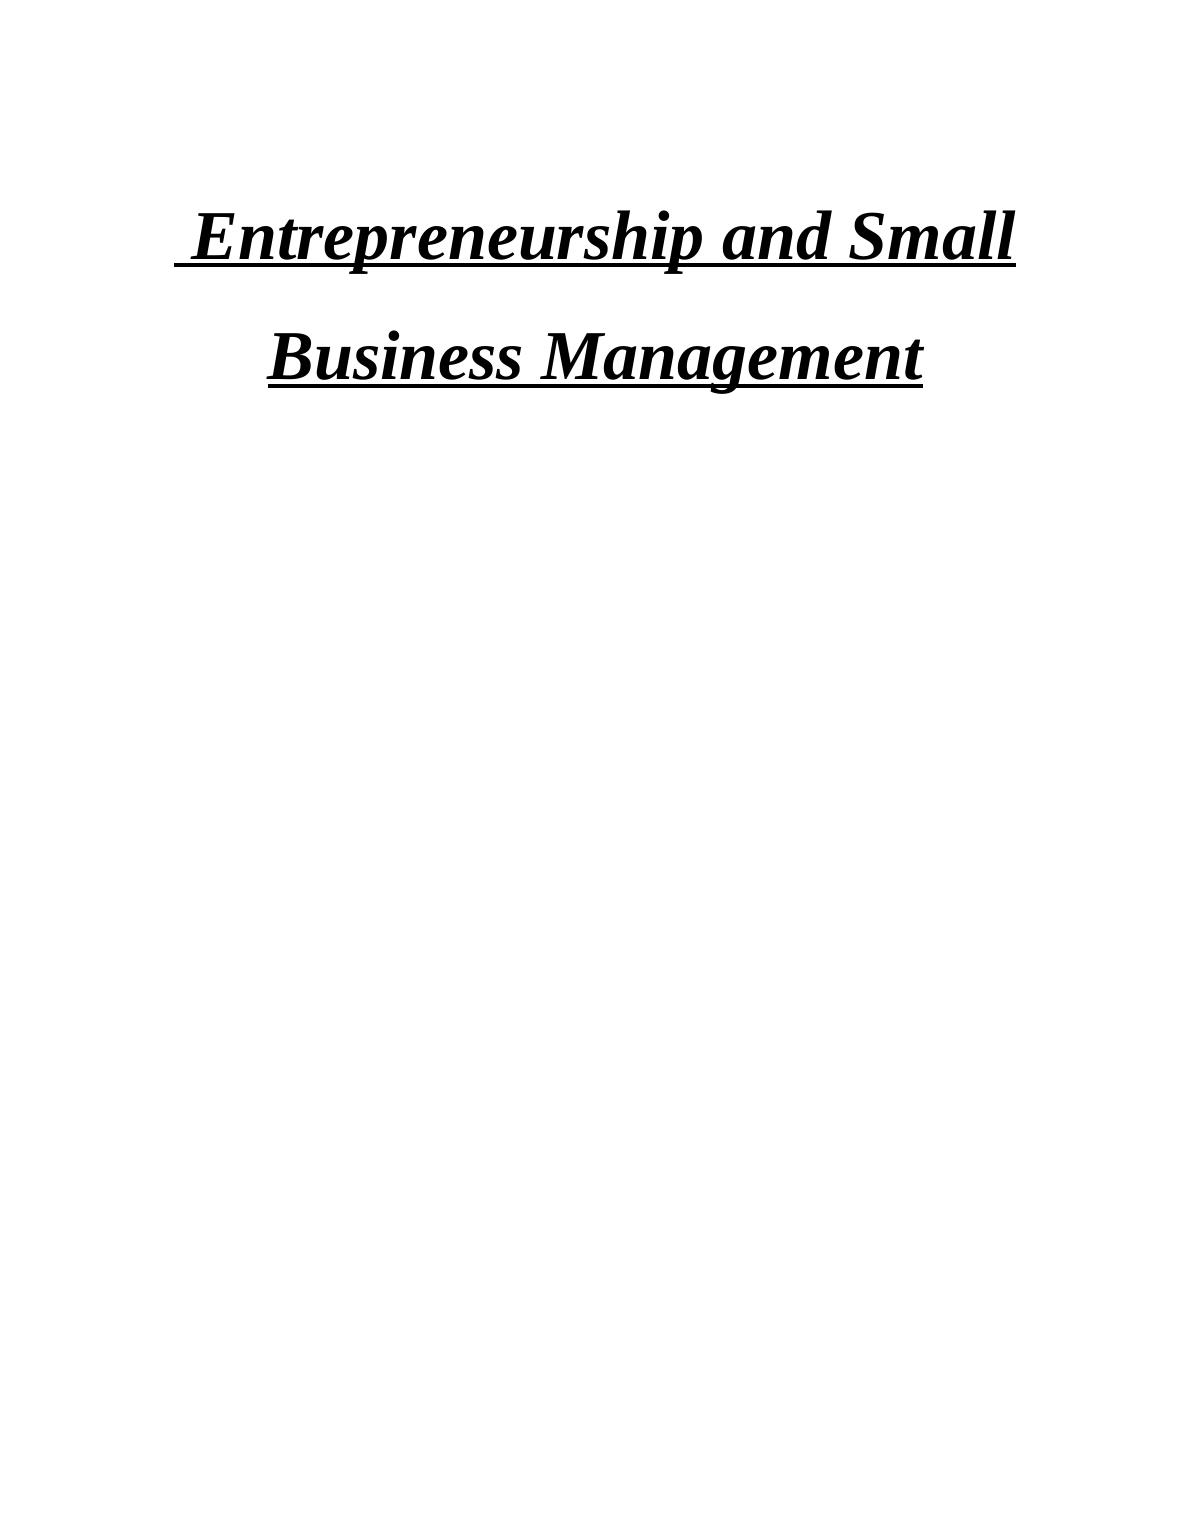 P2.Explore the similarities and differences between entrepreneurial ventures_1